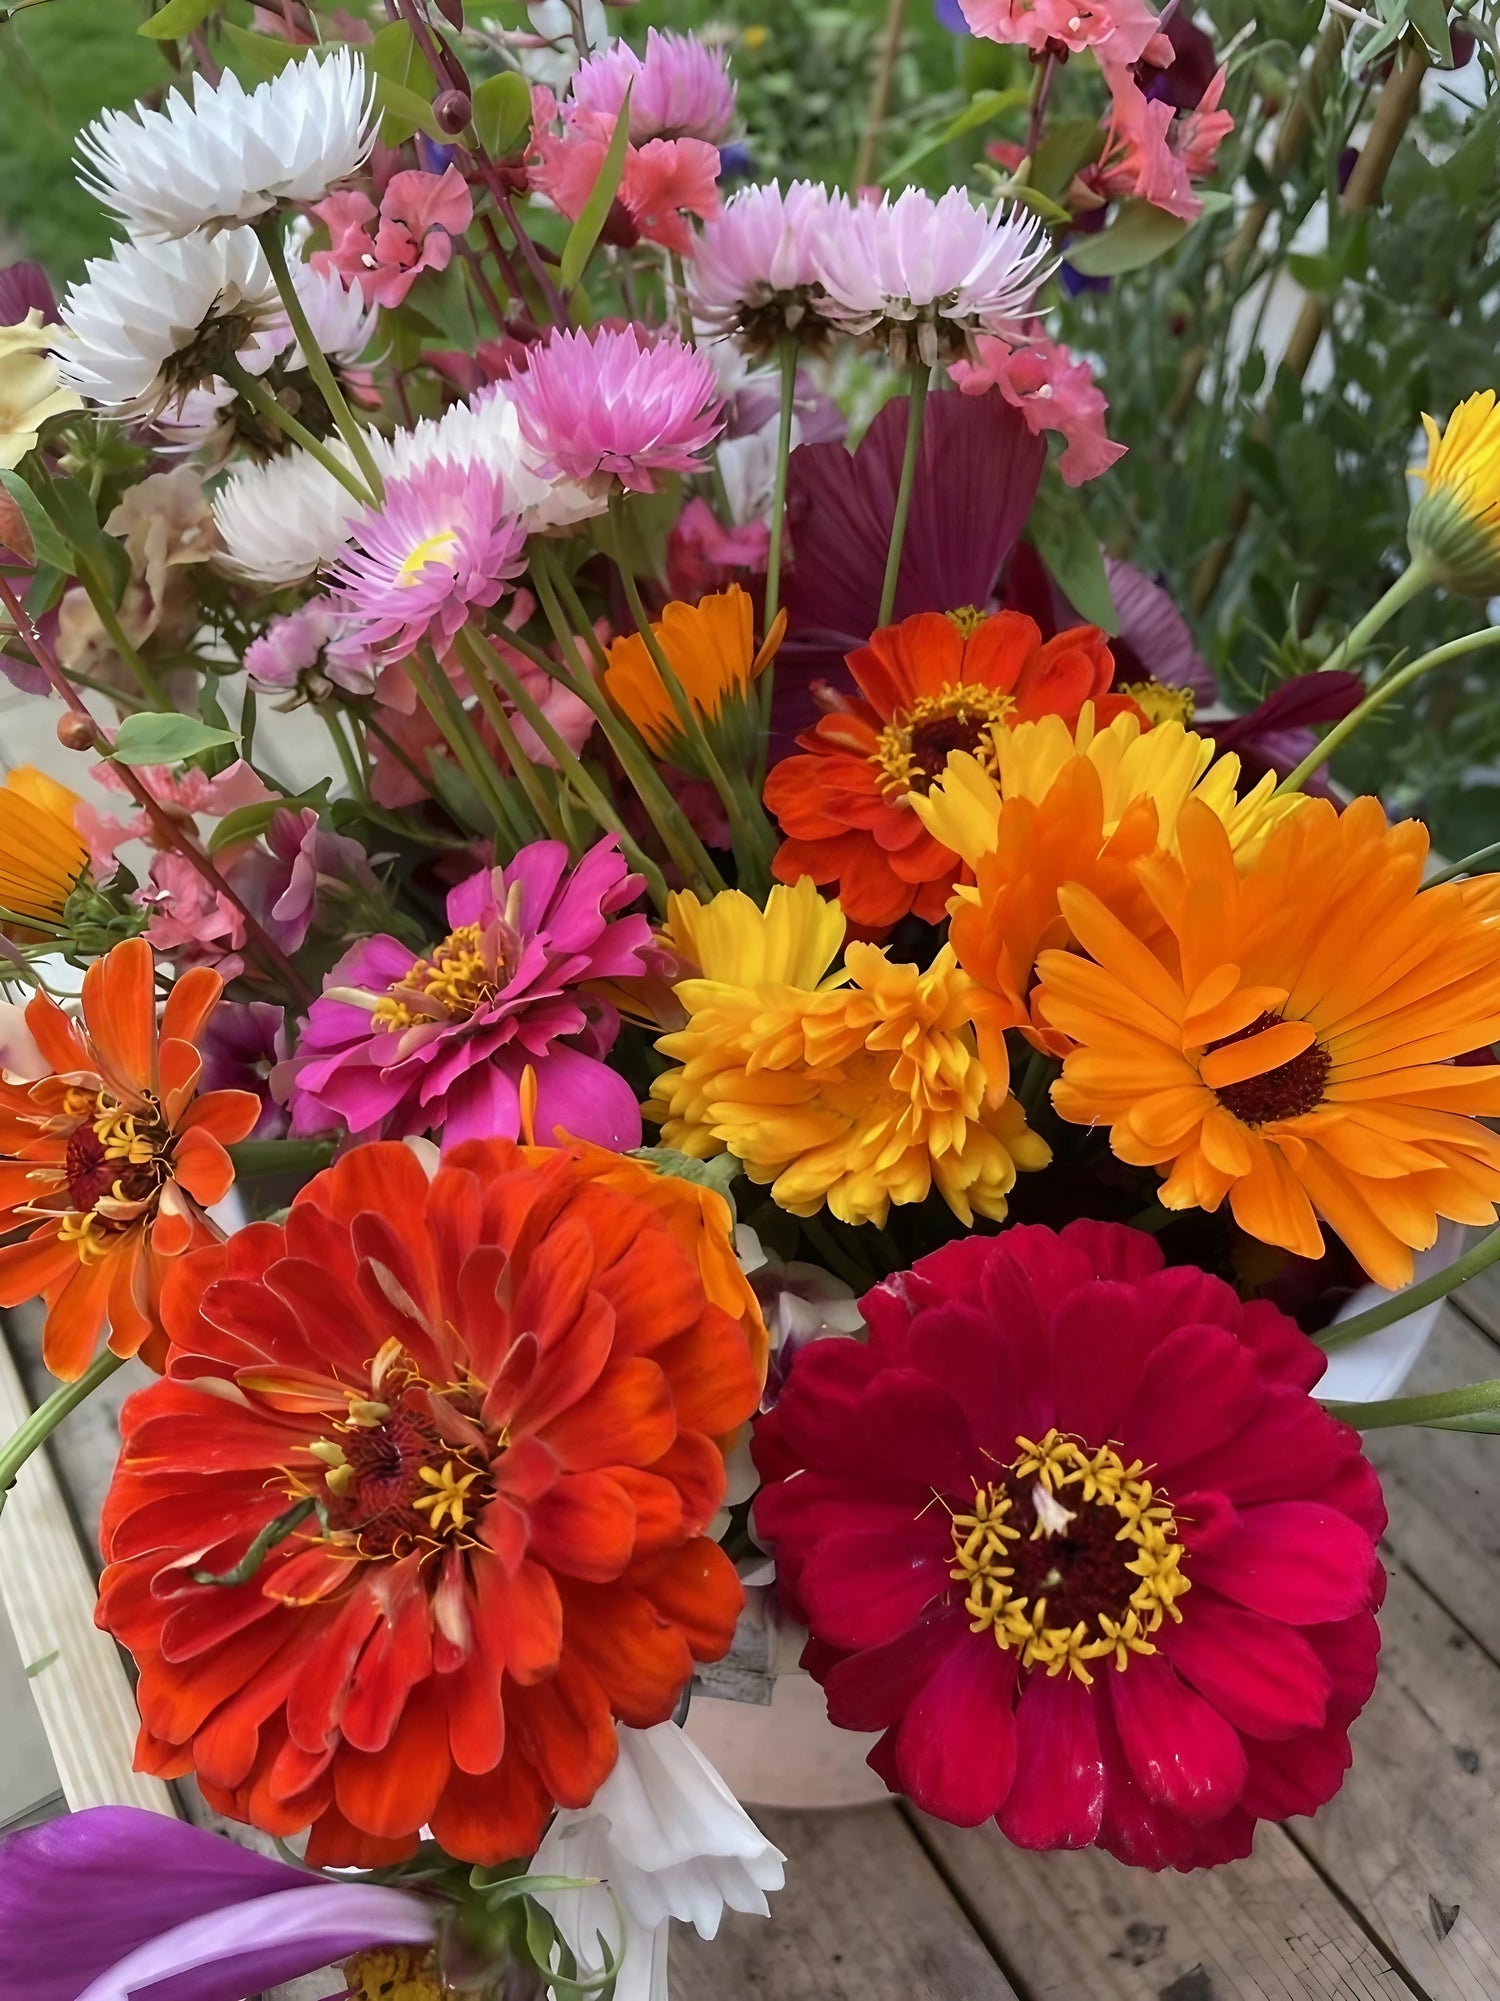 Assorted Zinnia Giants of California flowers arranged in a basket on a rustic wooden surface